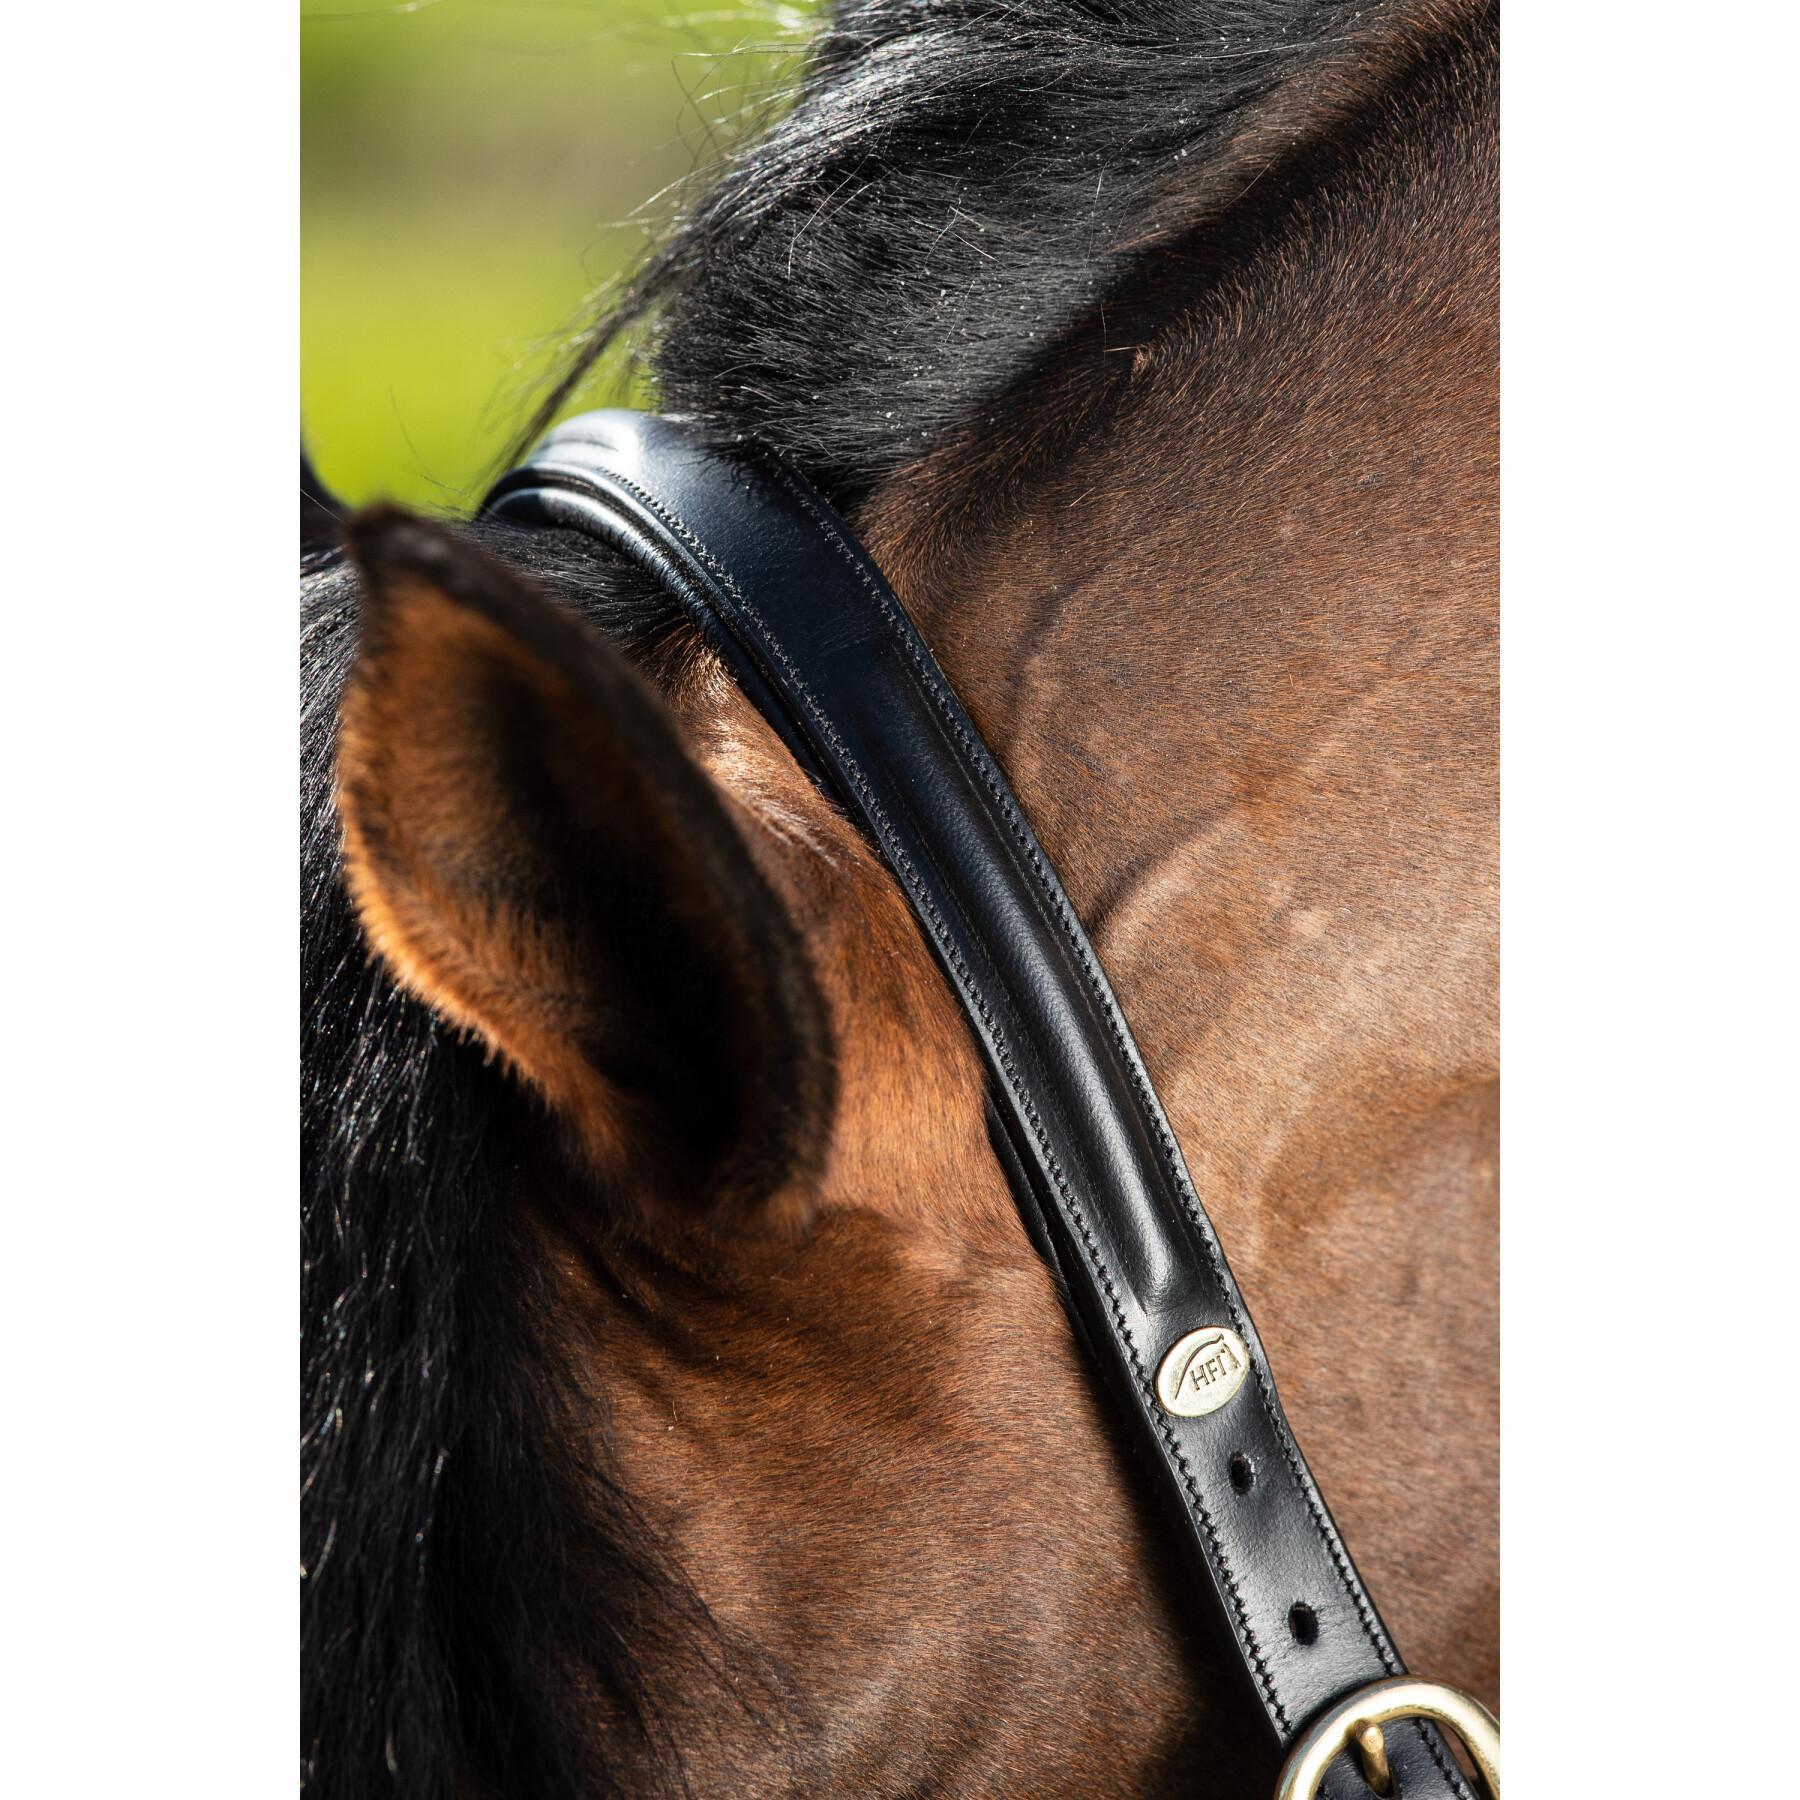 Lined leather halter for horses HFI Raised